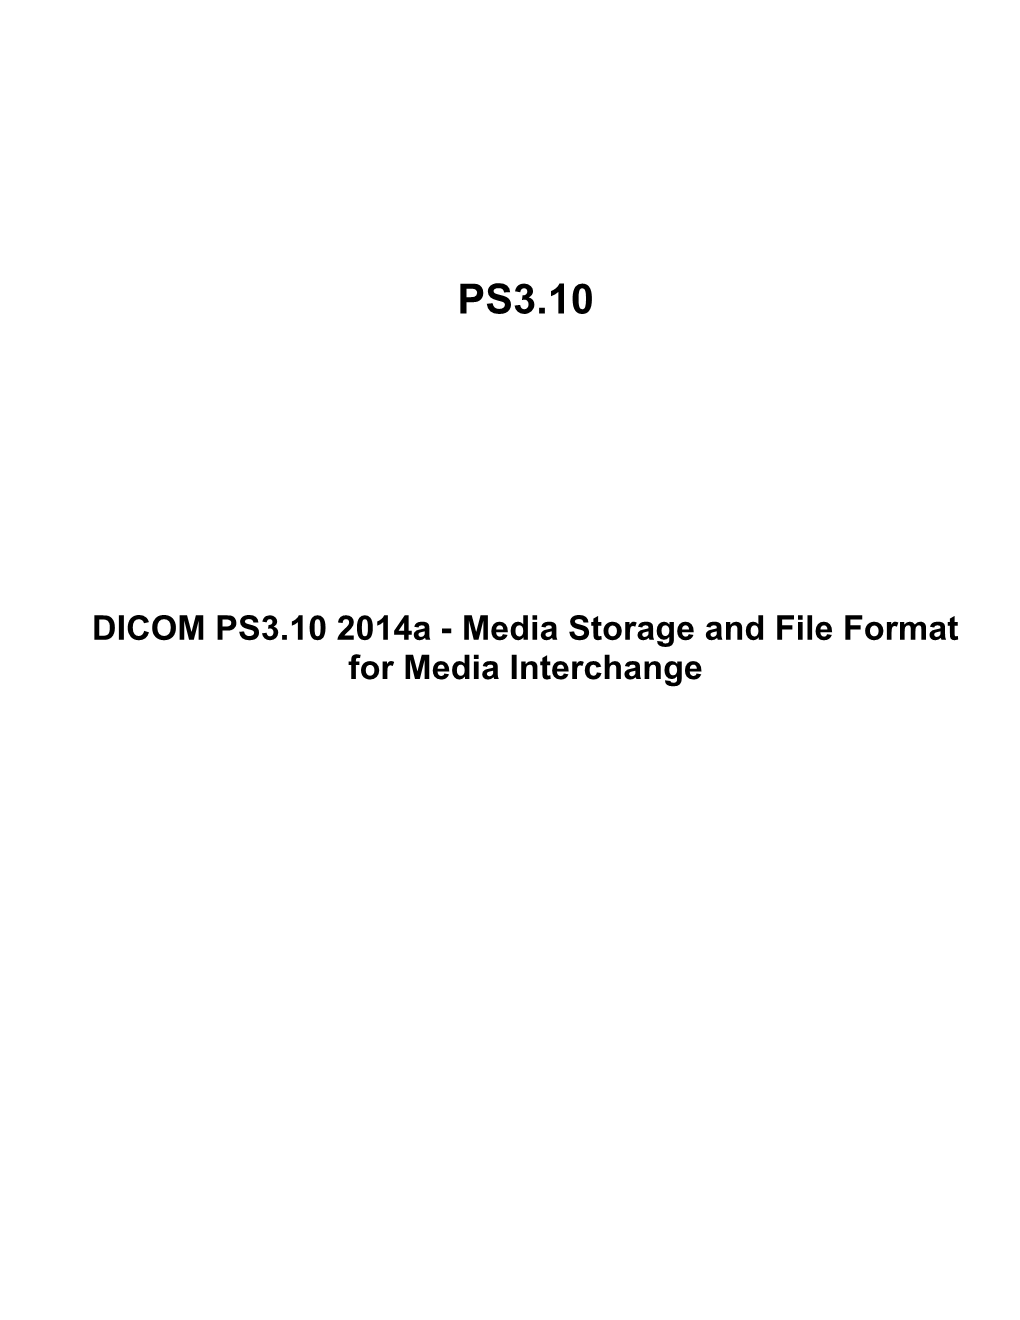 DICOM PS3.10 2014A - Media Storage and File Format for Media Interchange